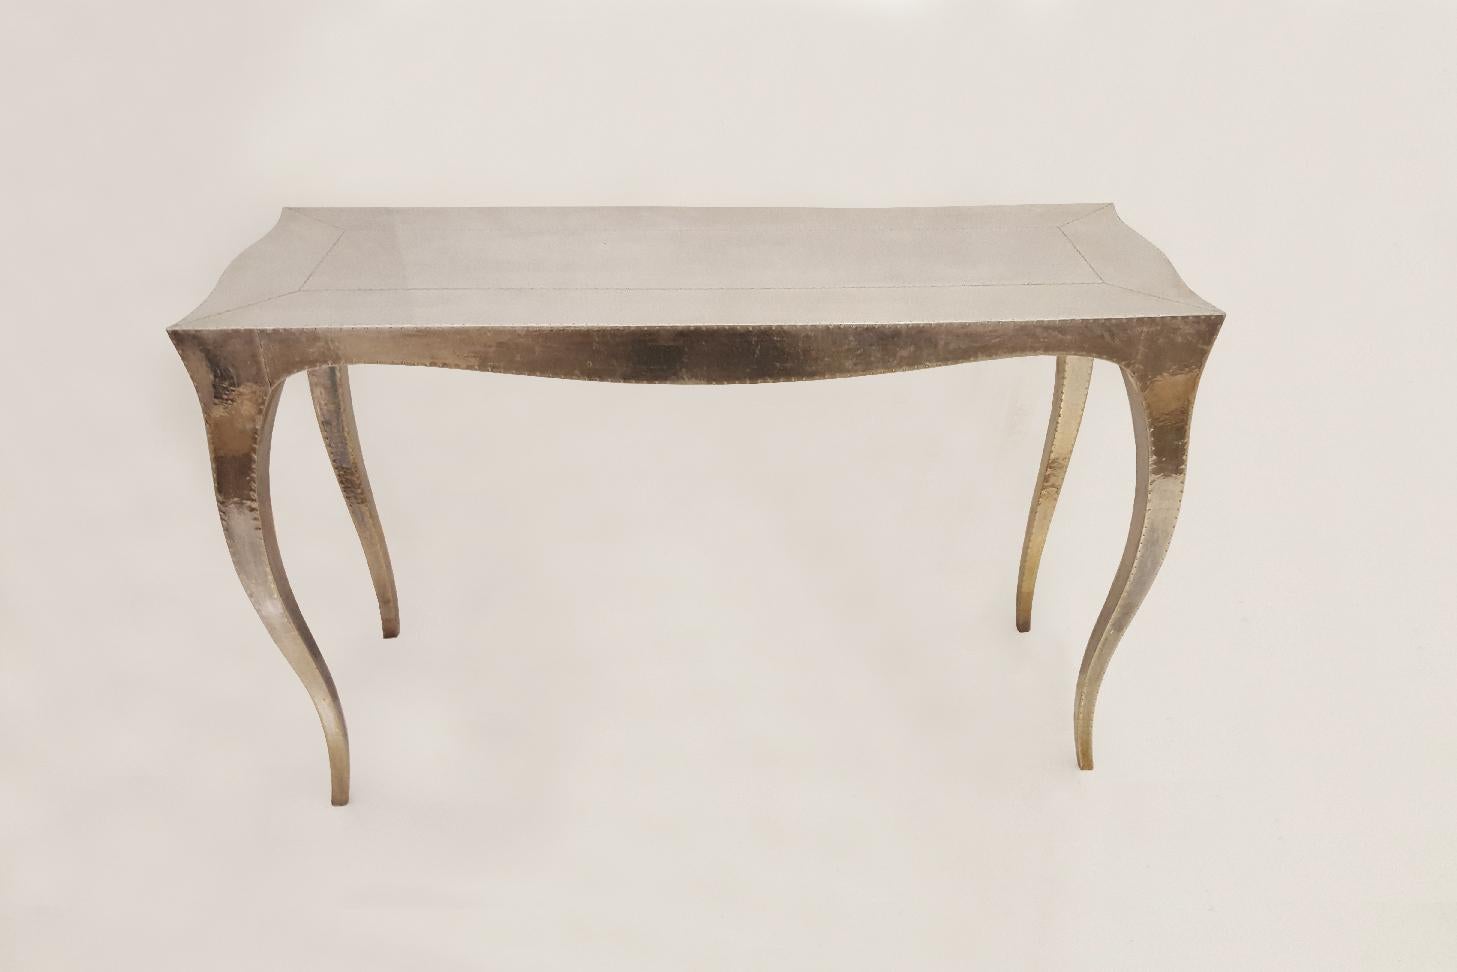 Louise Console Art Deco Center Tables Mid. Hammered White Bronze by Paul Mathieu For Sale 5